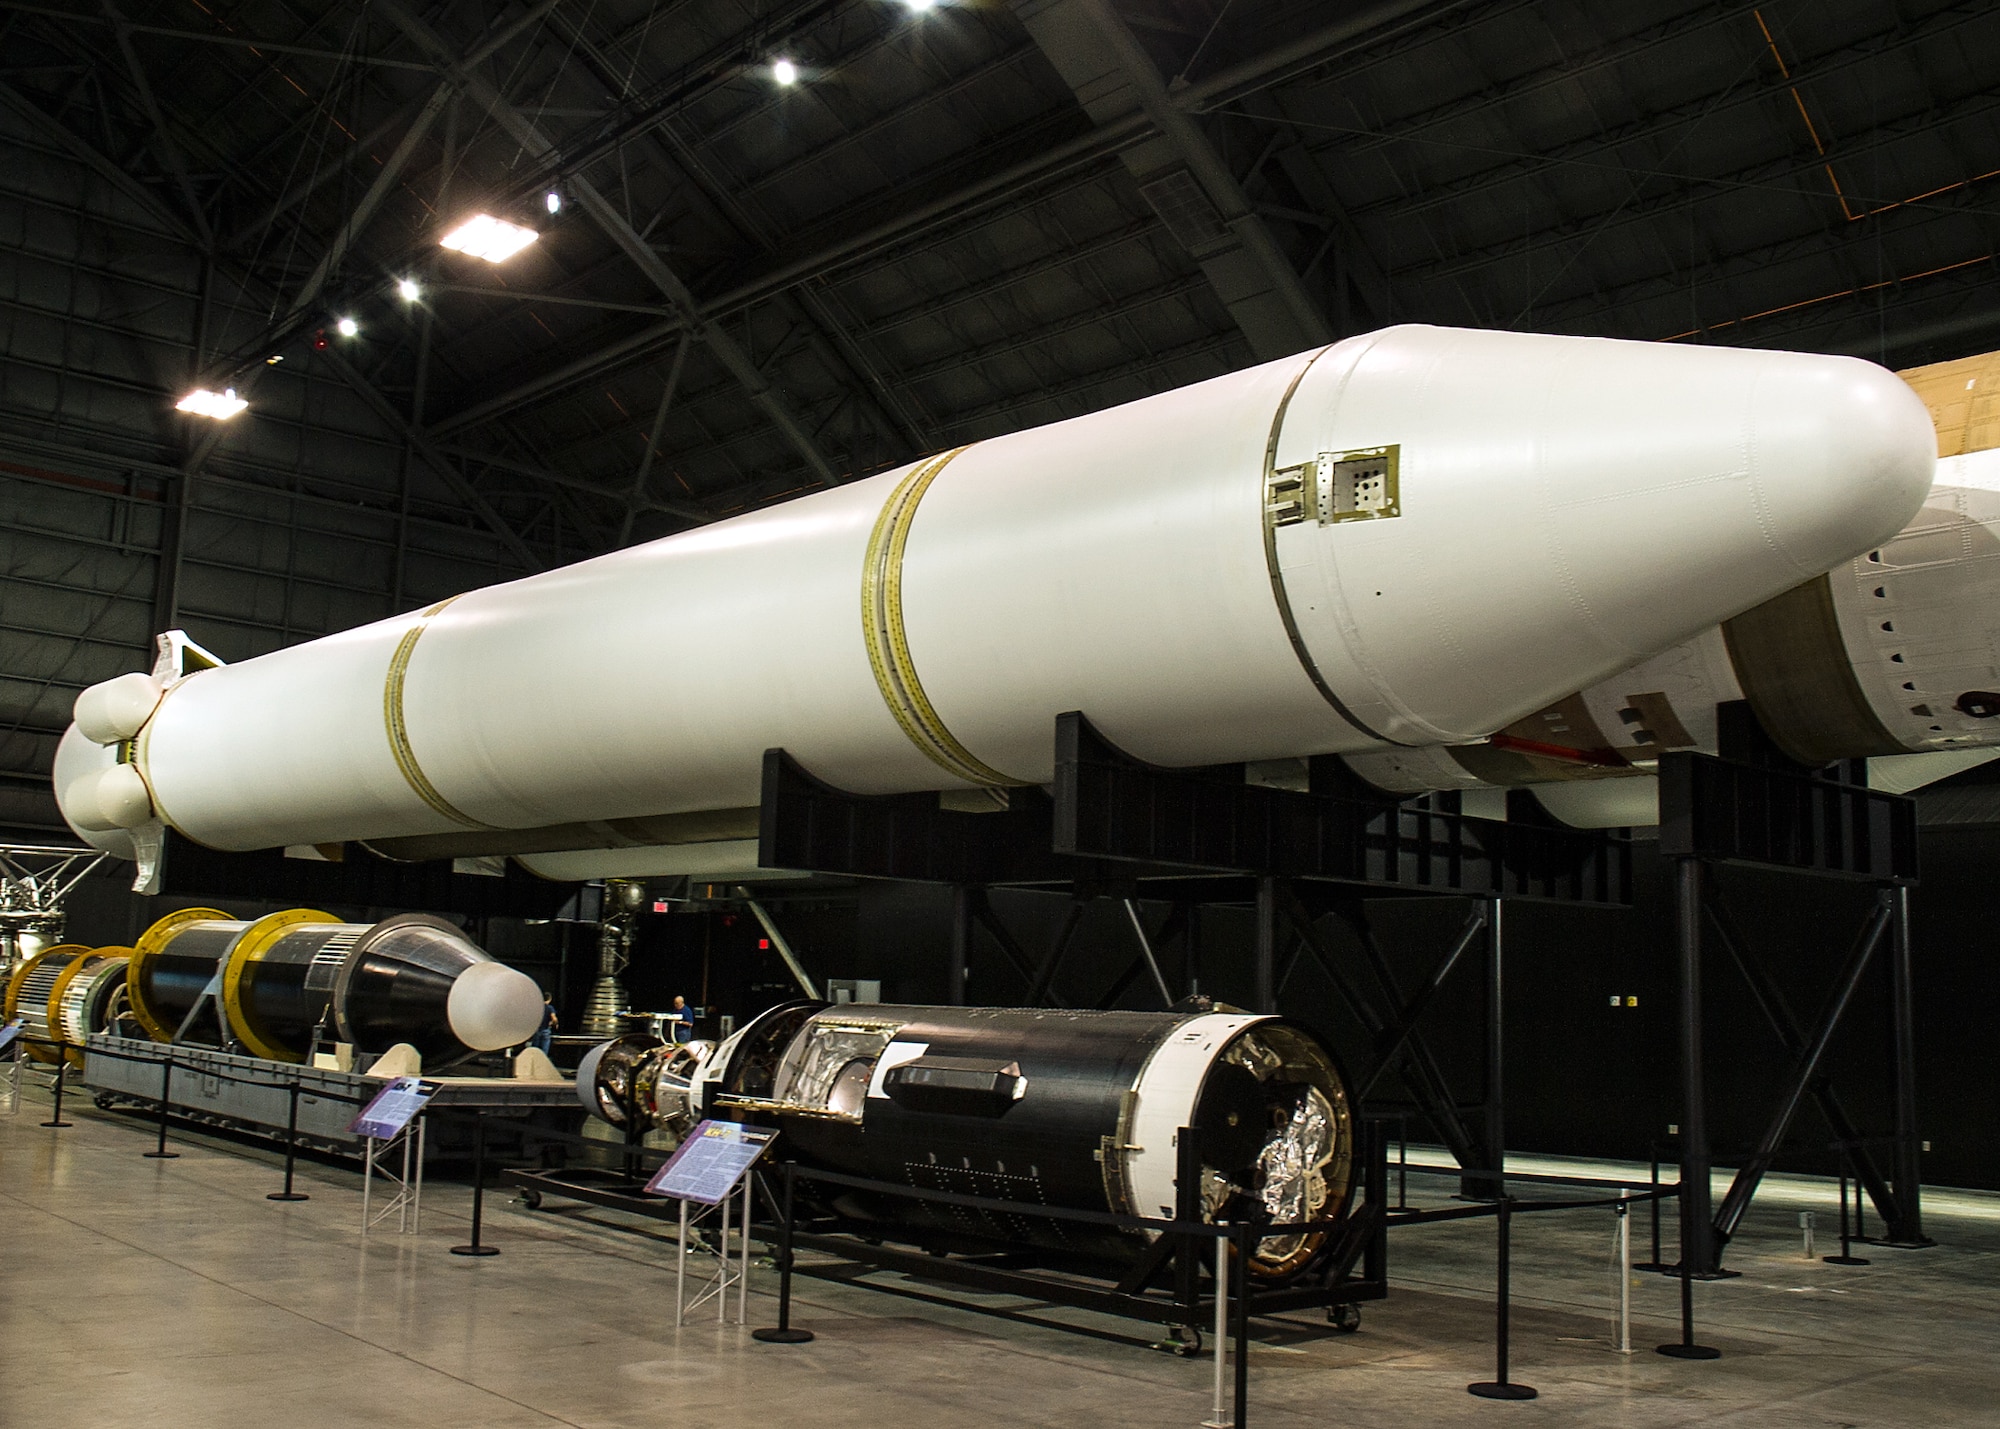 DAYTON, Ohio - The Titan IVB solid rocket motor upgrades(SRMU's) on display in the Space Gallery at the National Museum of the U.S. Air Force. (U.S. Air Force photo by Ken LaRock)


 